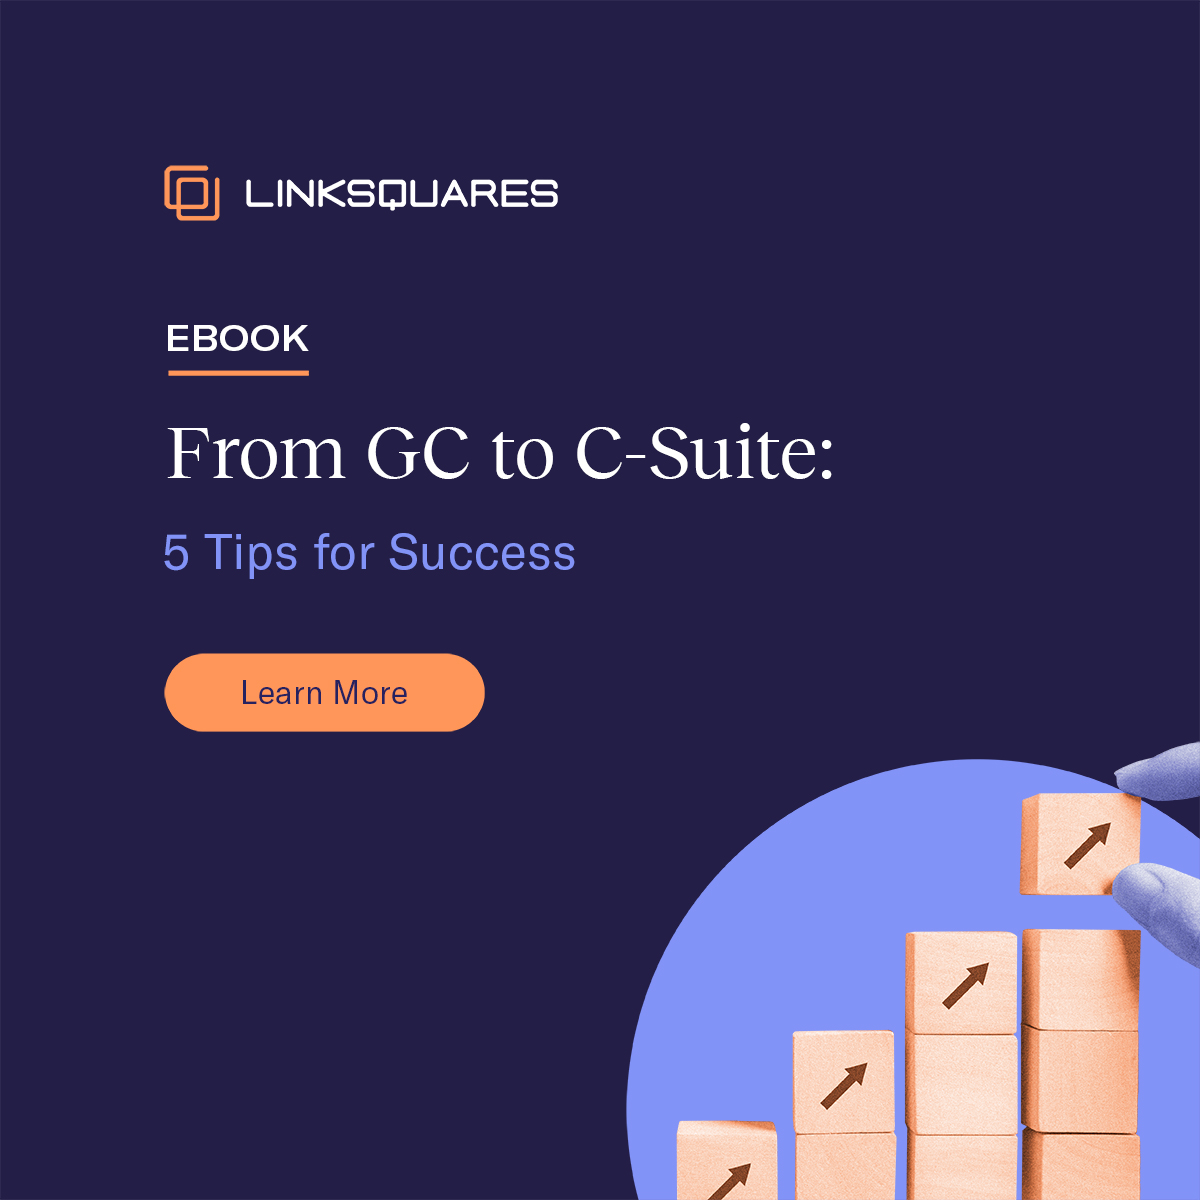 From GC to C-Suite: 5 Tips for Success